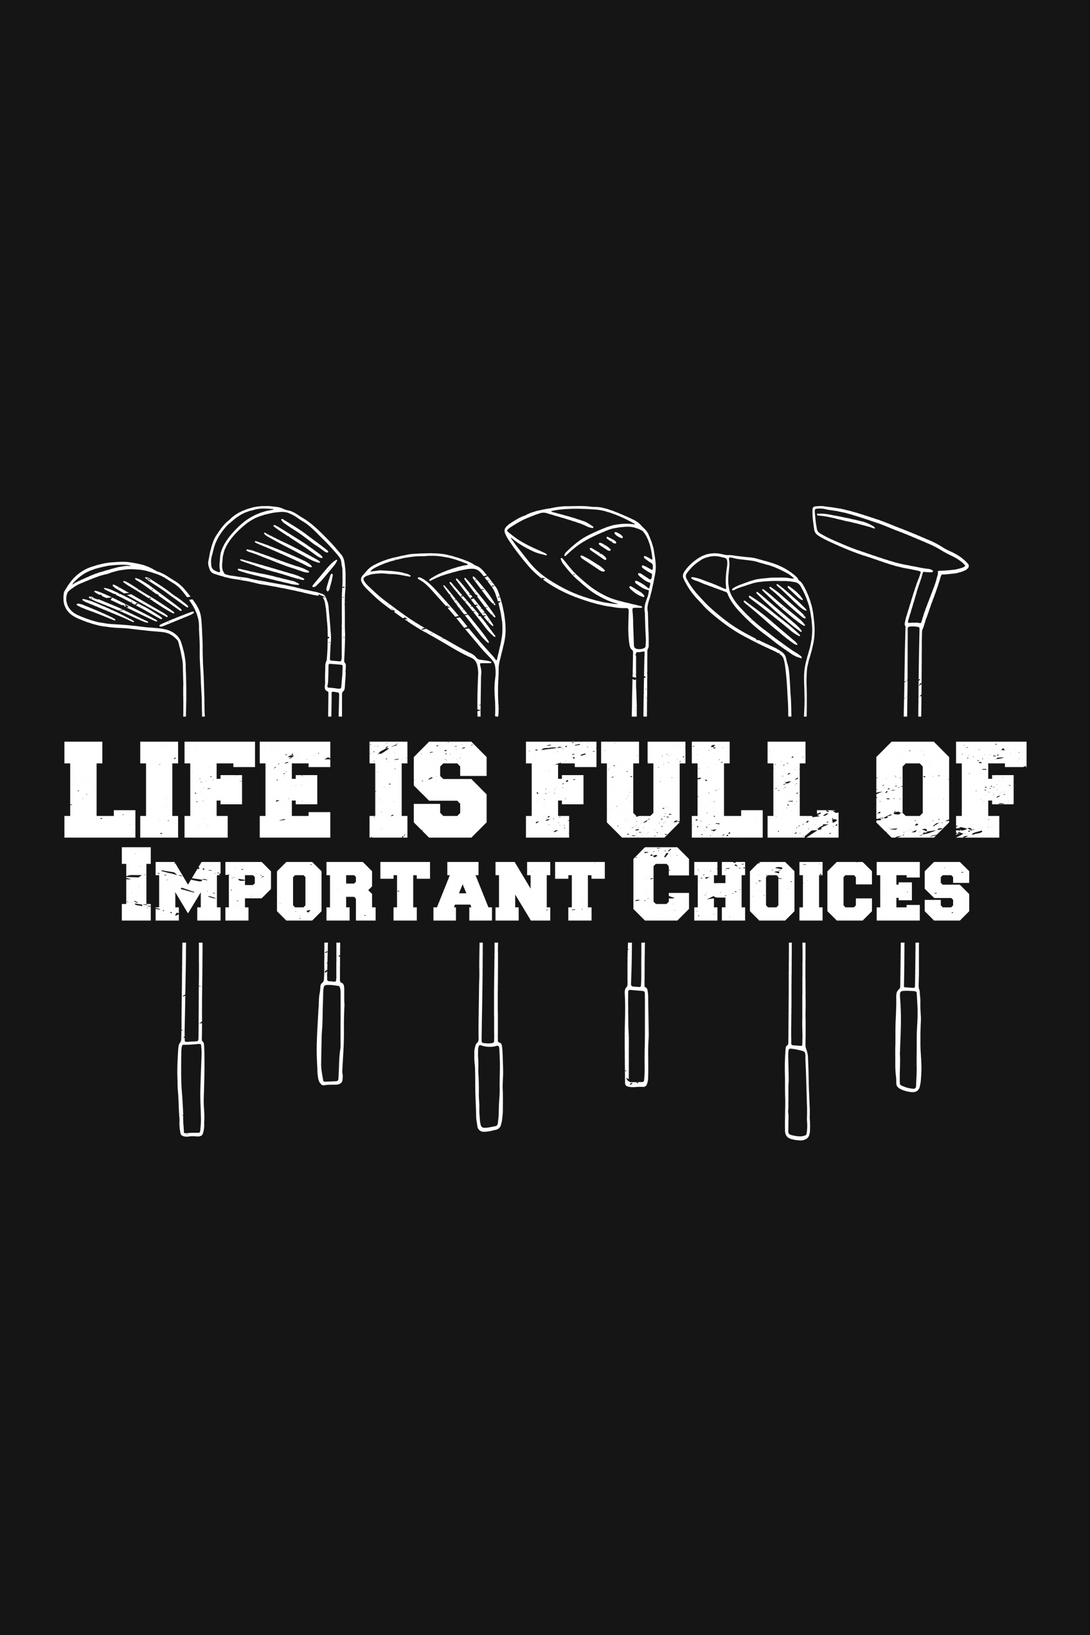 Life Is Full Of Important Choices Printed T-Shirt For Men - WowWaves - 1